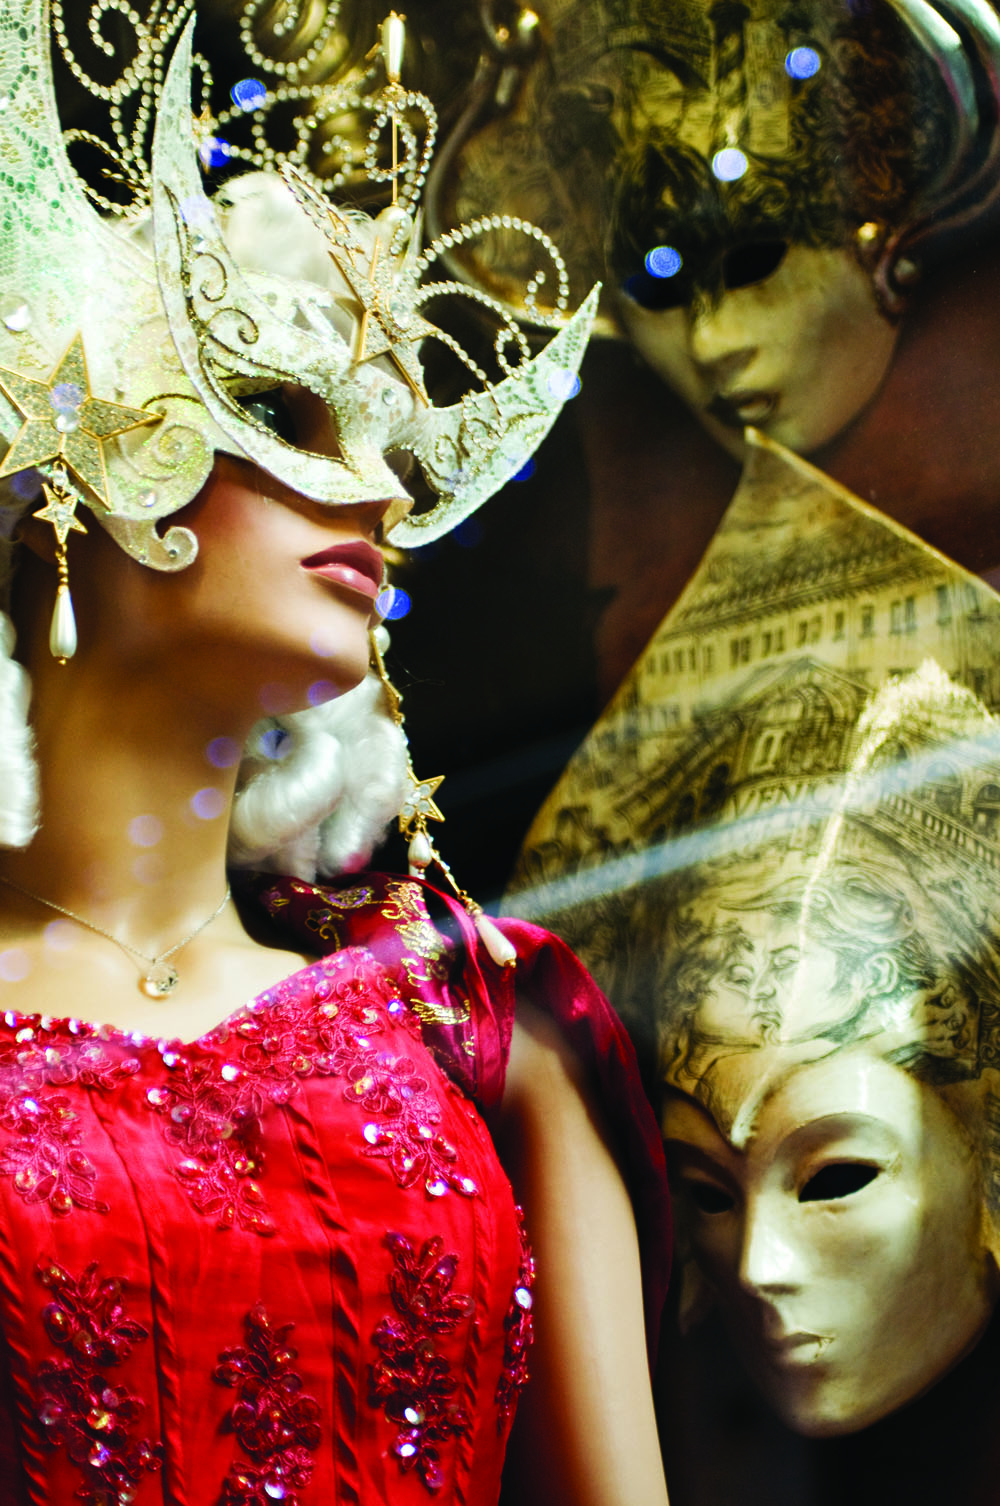 Sumptuous Carnival costumes for sale in a shop in Venice